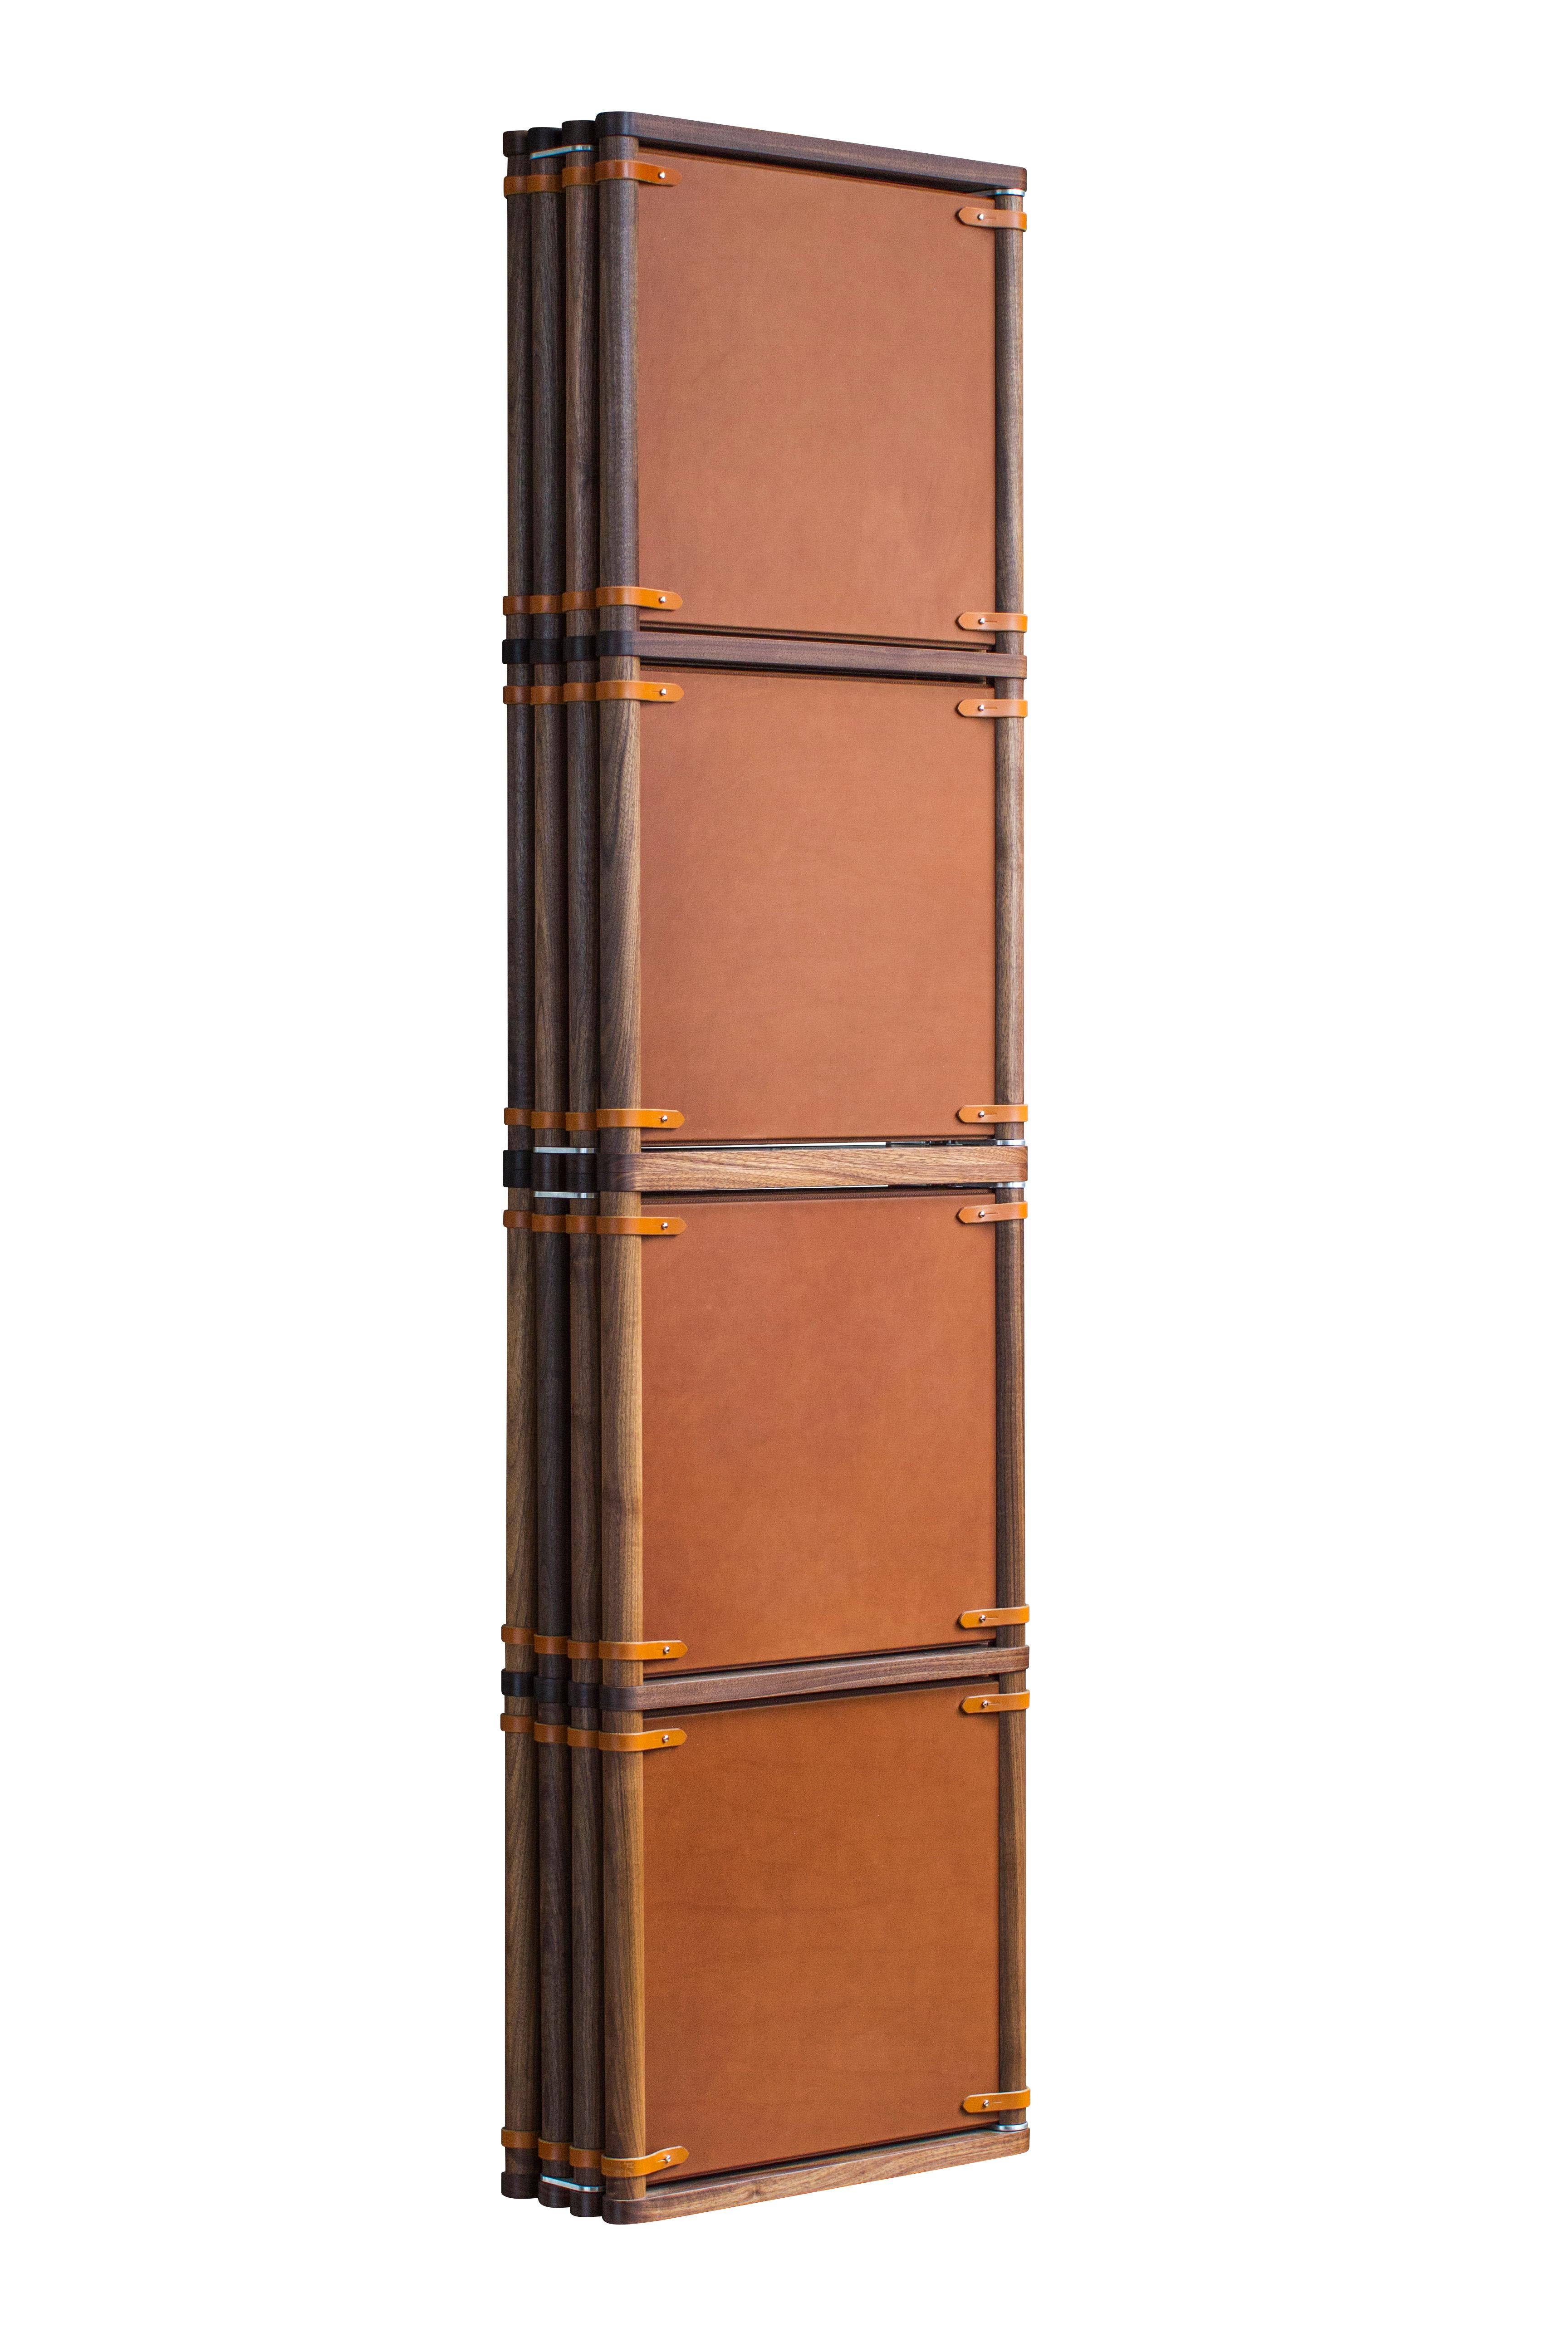 The Lambert Folding Screen Type 2 in oiled walnut with tan leather panels and cognac English bridle leather straps. The Lambert folding screen Type 2 is different from our Type 1 screen in that both sides of the screen are identical. The leather or